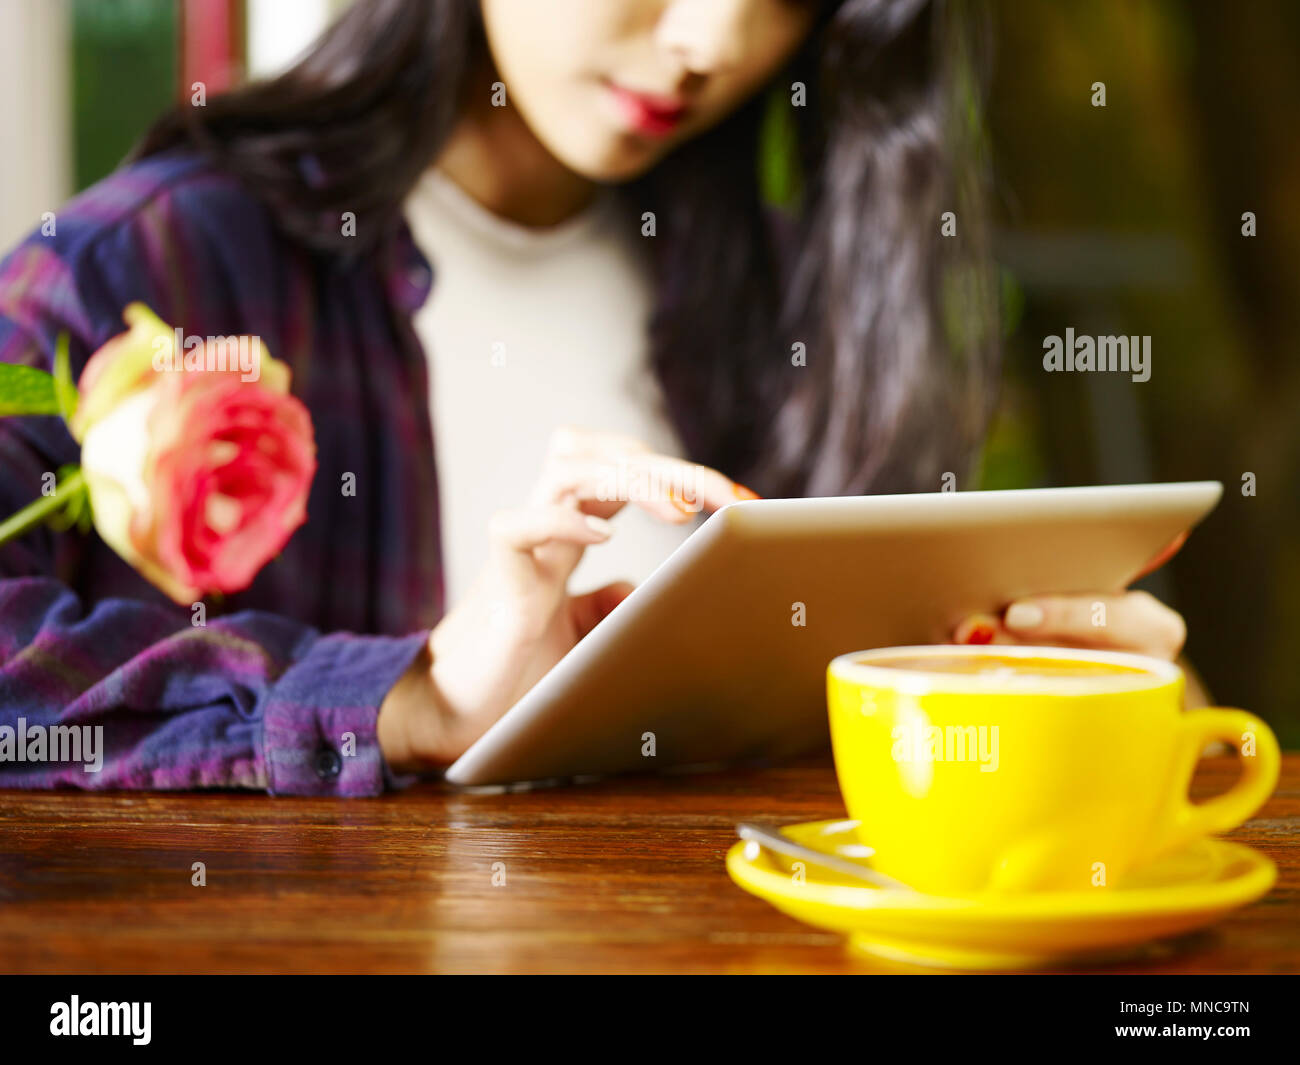 Young Asian woman using digital tablet in coffee shop Banque D'Images